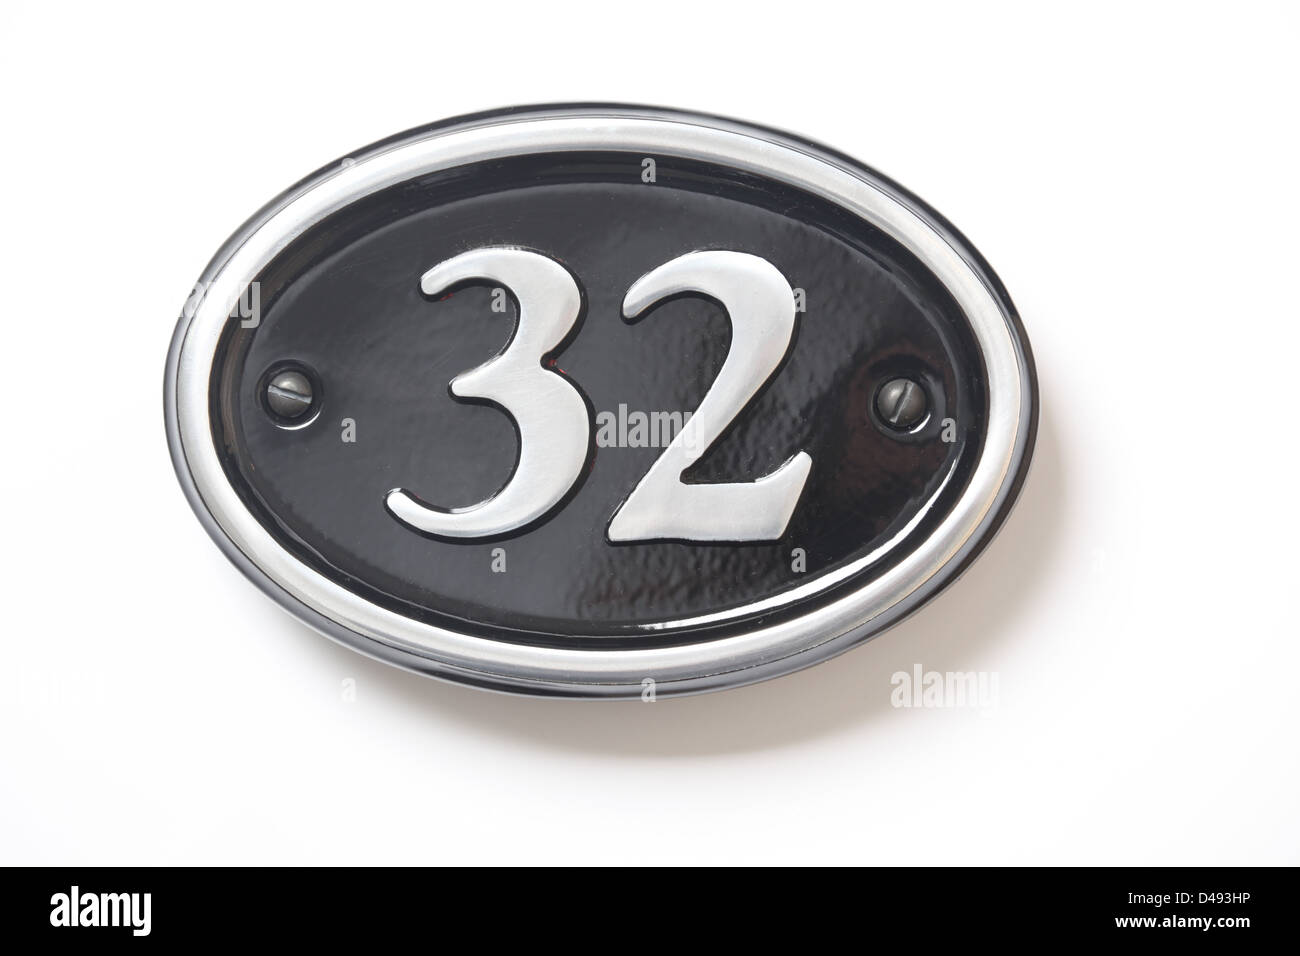 Number 32 black and chrome house plate. Stock Photo